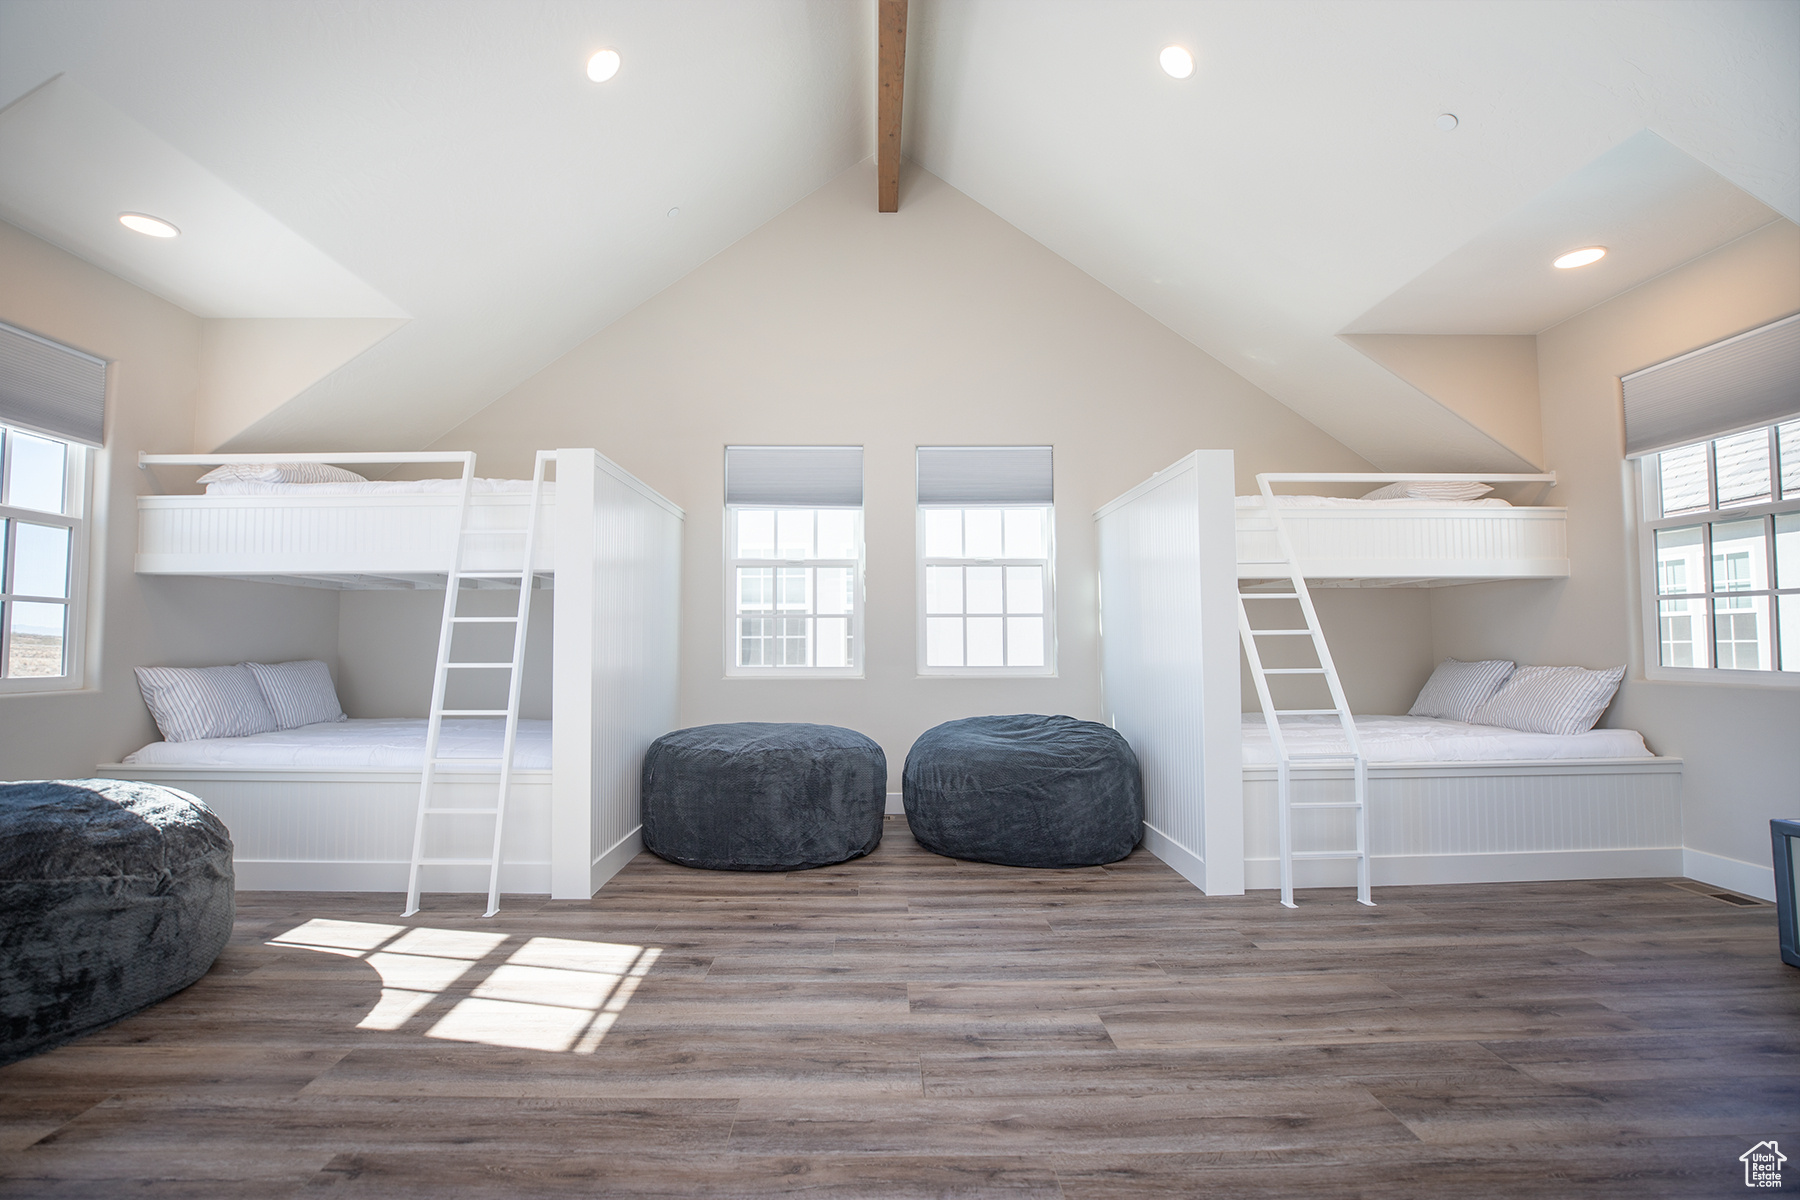 Bedroom with wood-type flooring and vaulted ceiling with beams